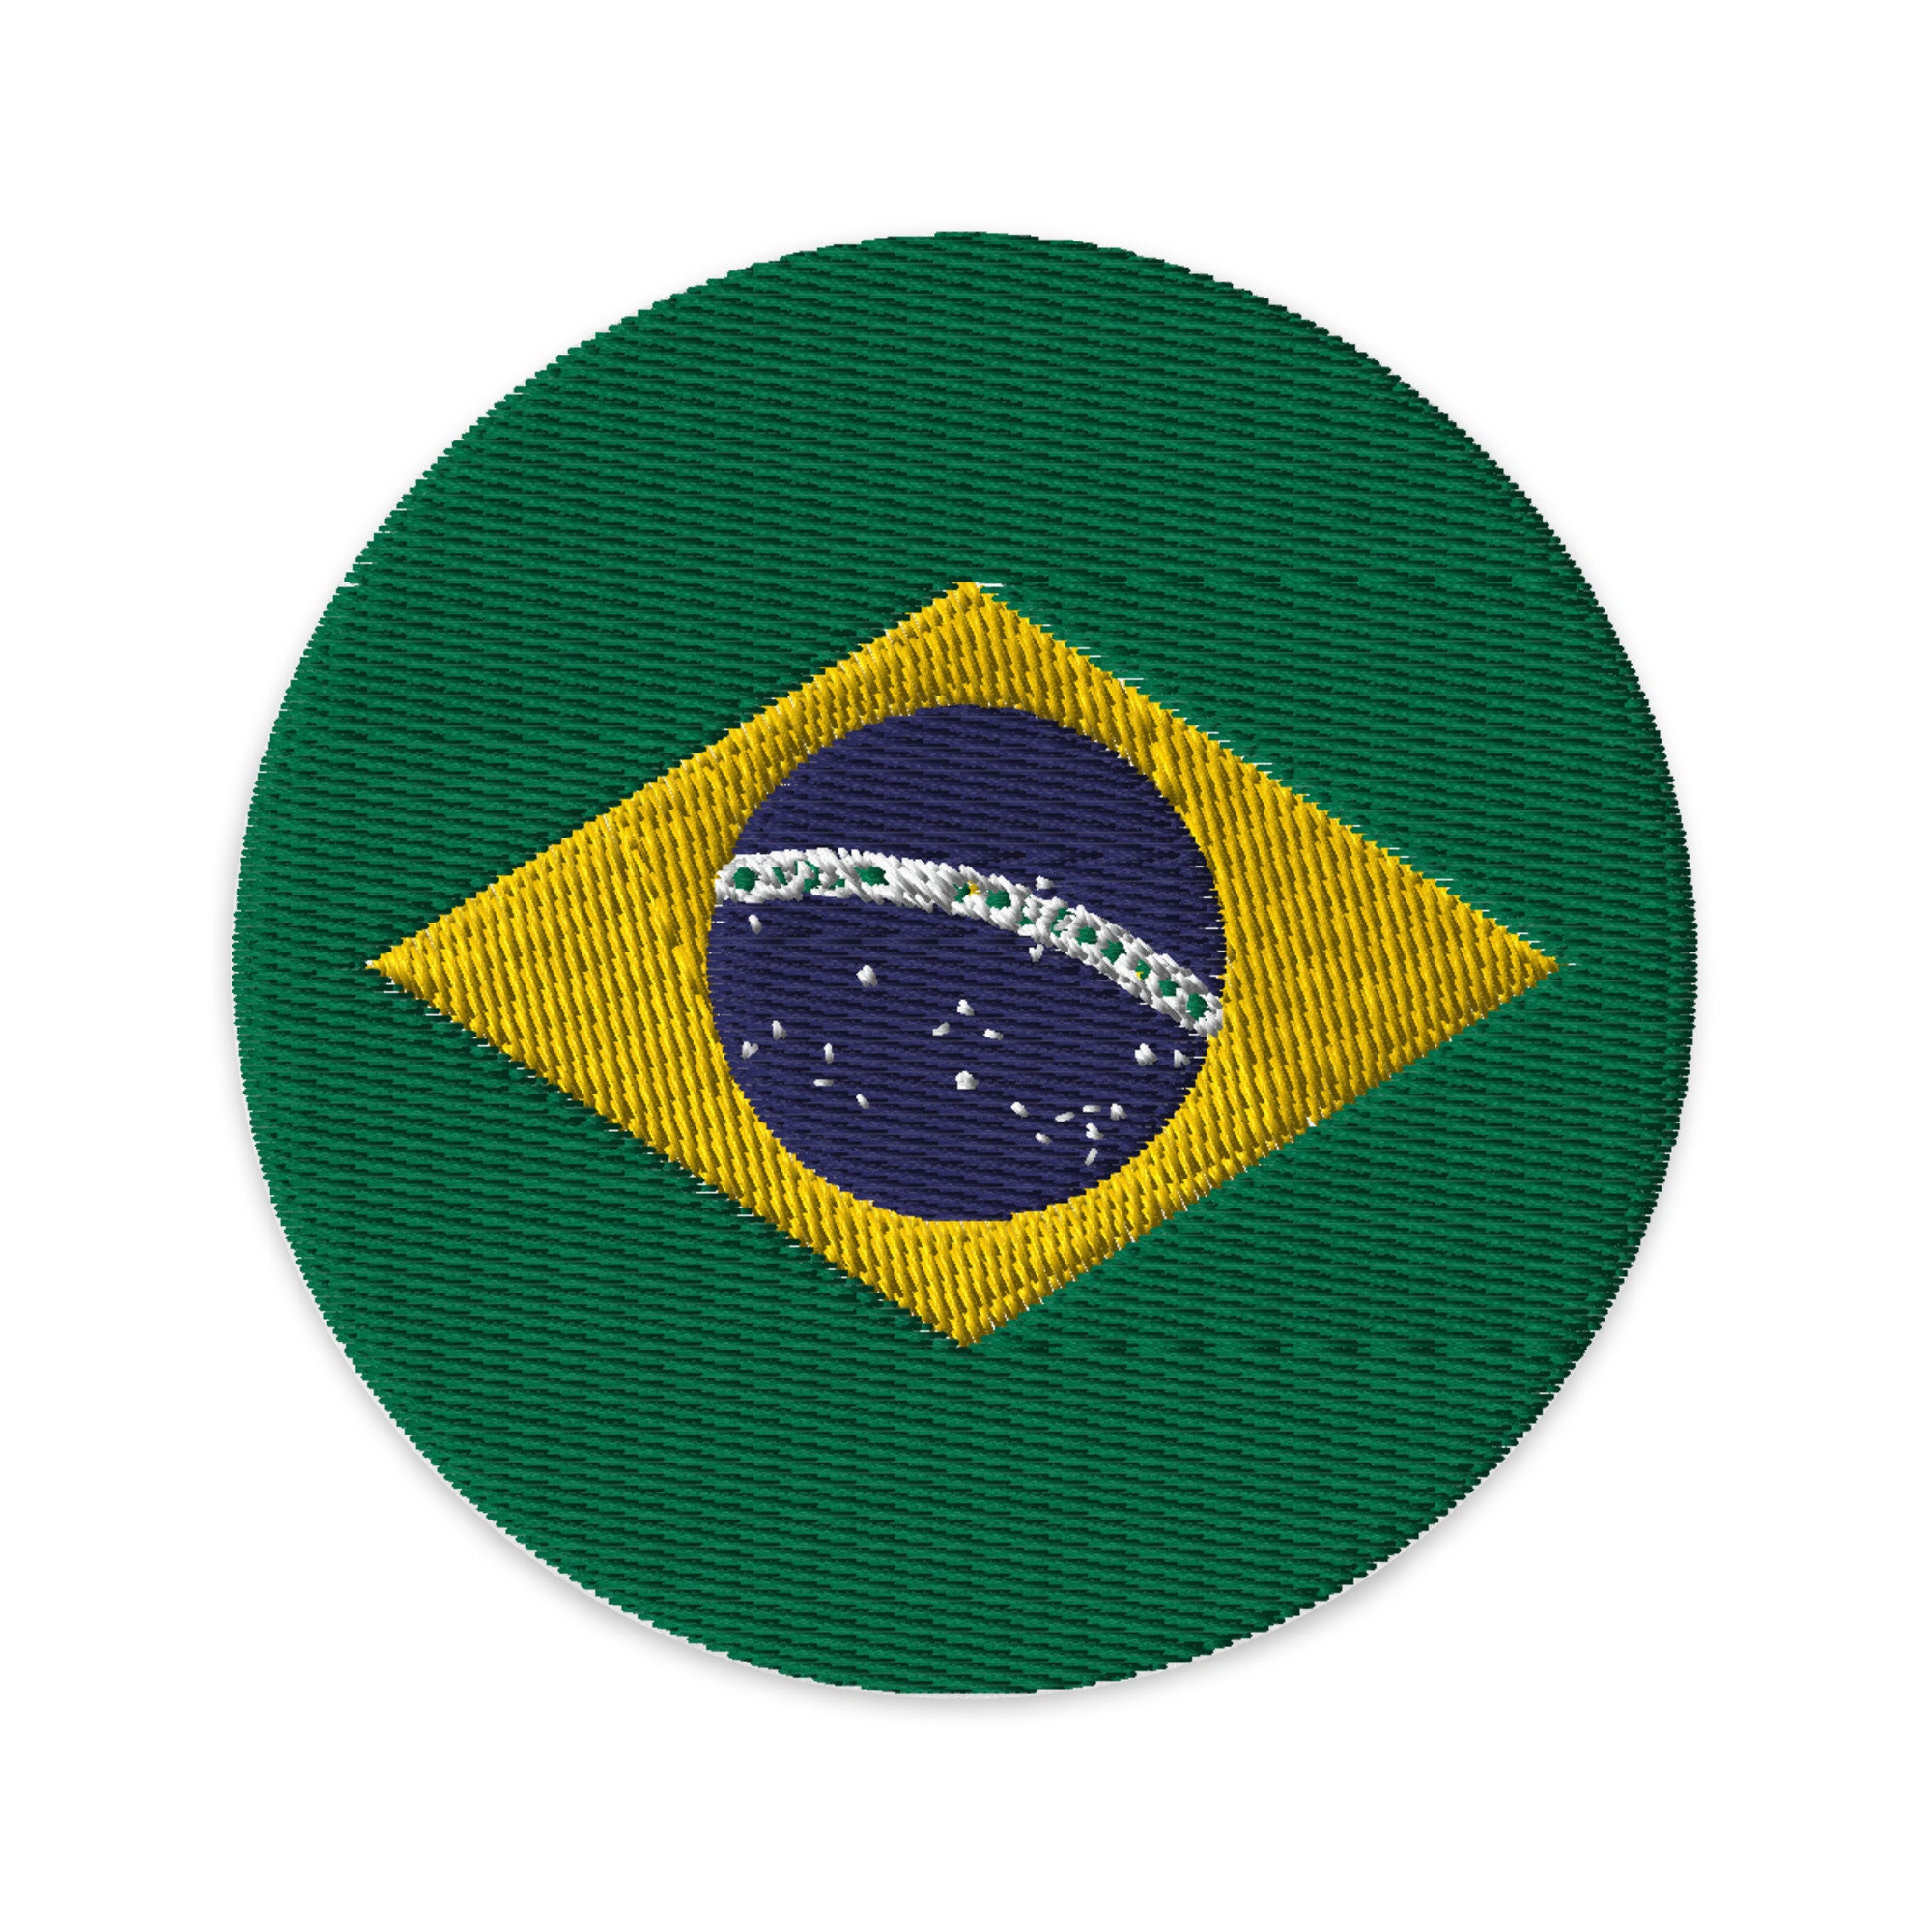 Brazil Flag Patch | Embroidered Iron-on or Sew-on DIY Applique For Vest,  Backpack, Clothing Badge, Bikers, Travel Collectors, Souvenir